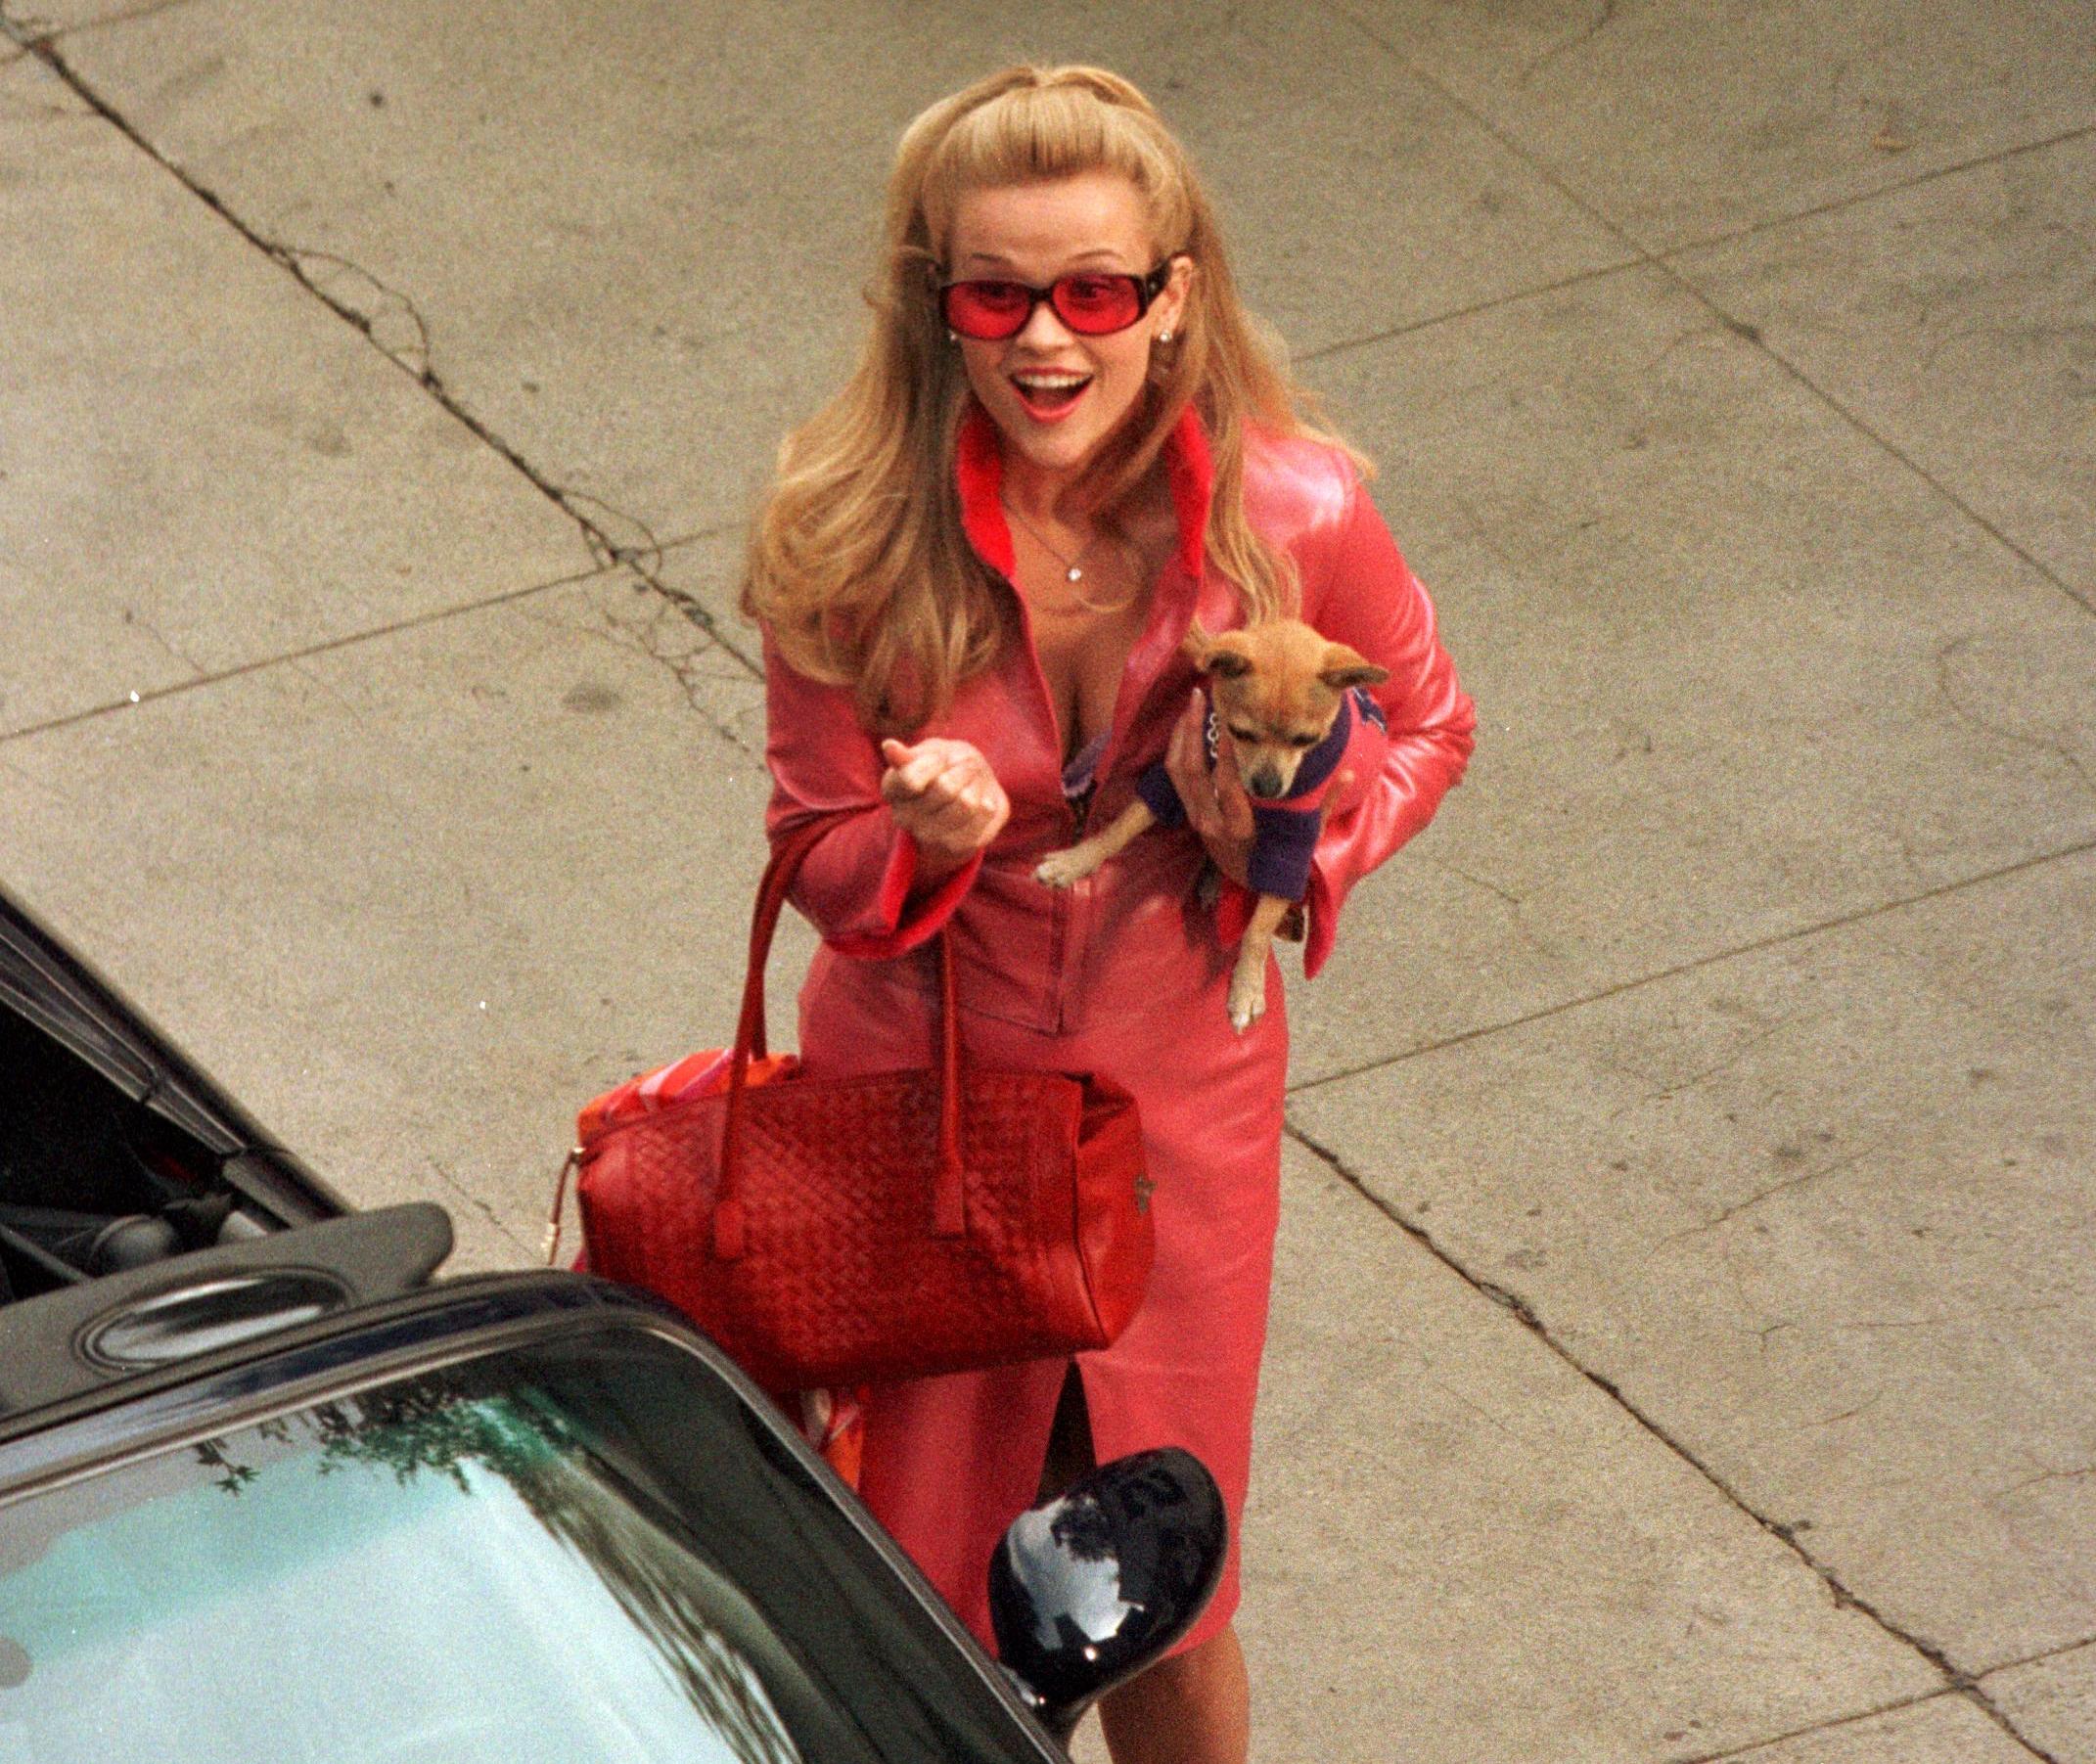 Reese Witherspoon as Elle Woods in the 2001 film 'Legally Blonde